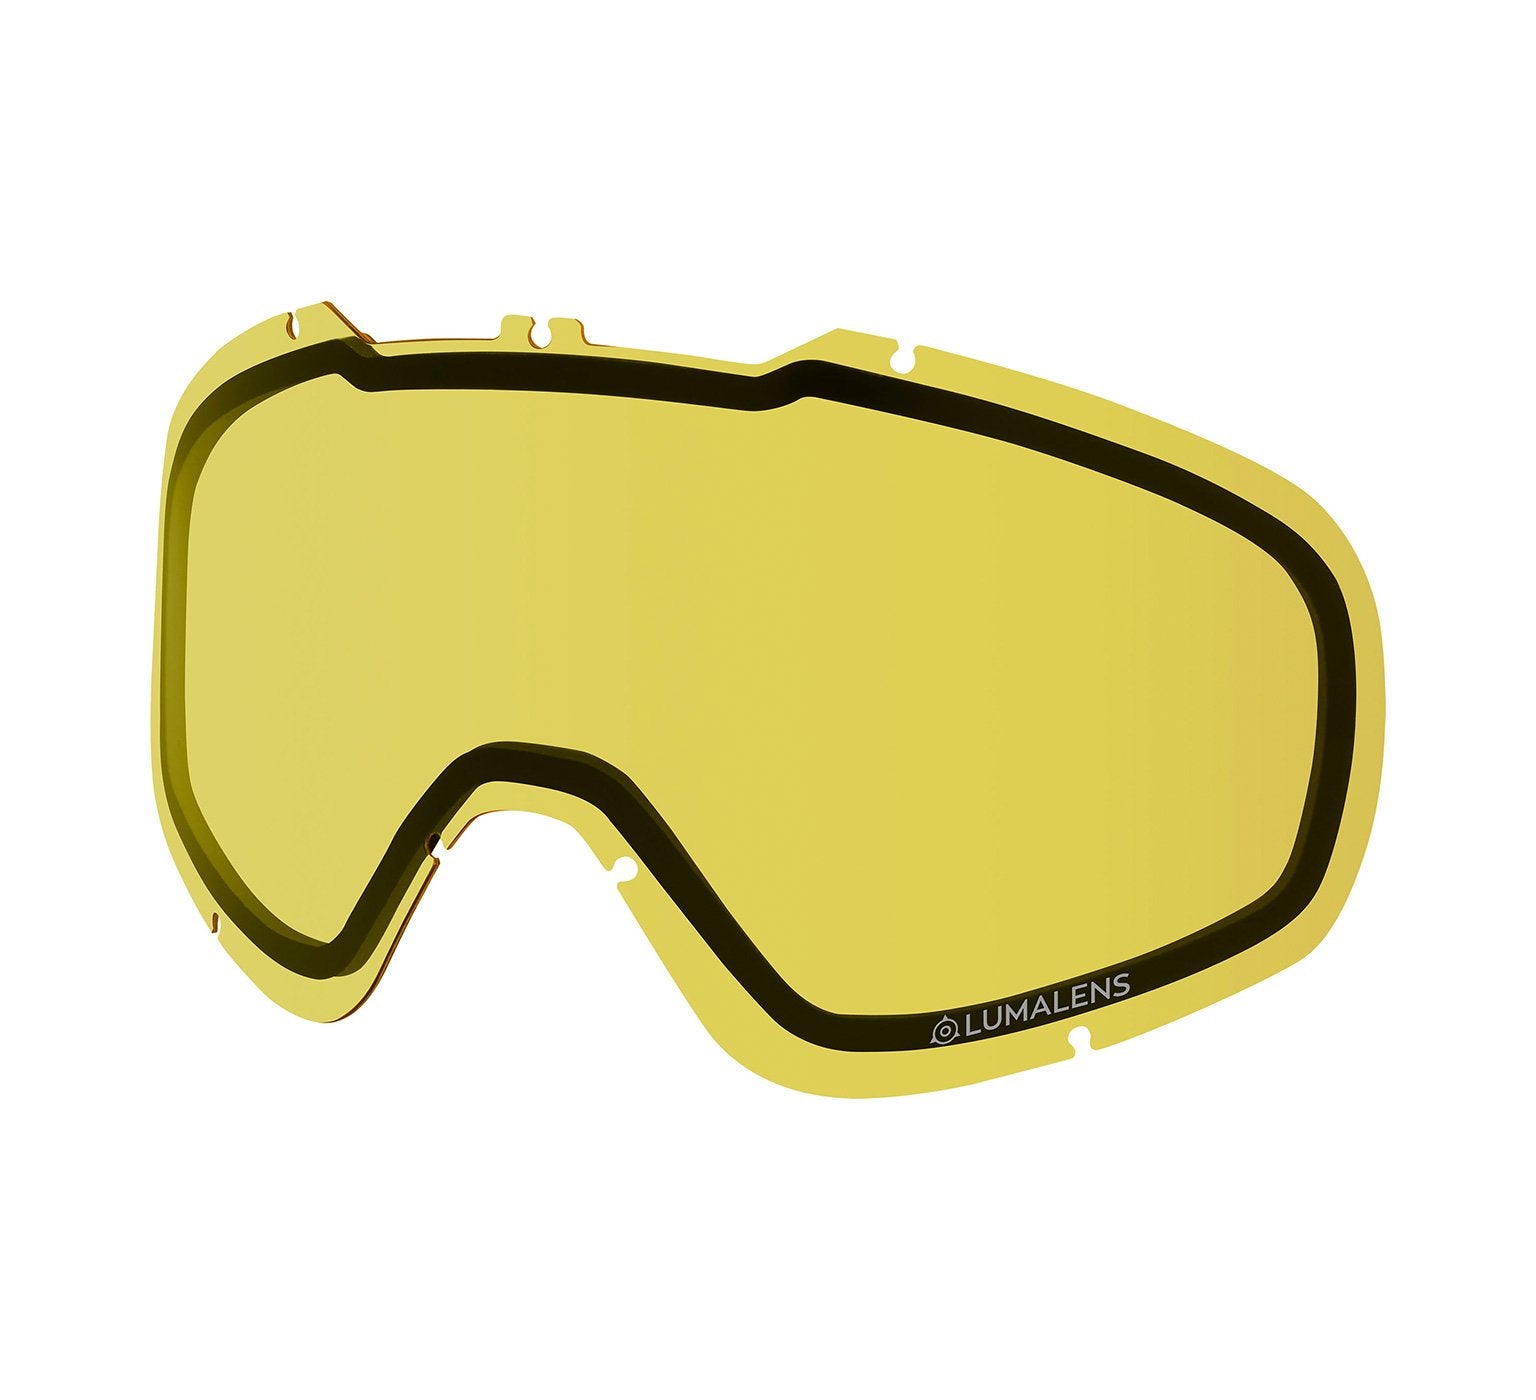 DX2 Replacement Lens - Lumalens Yellow